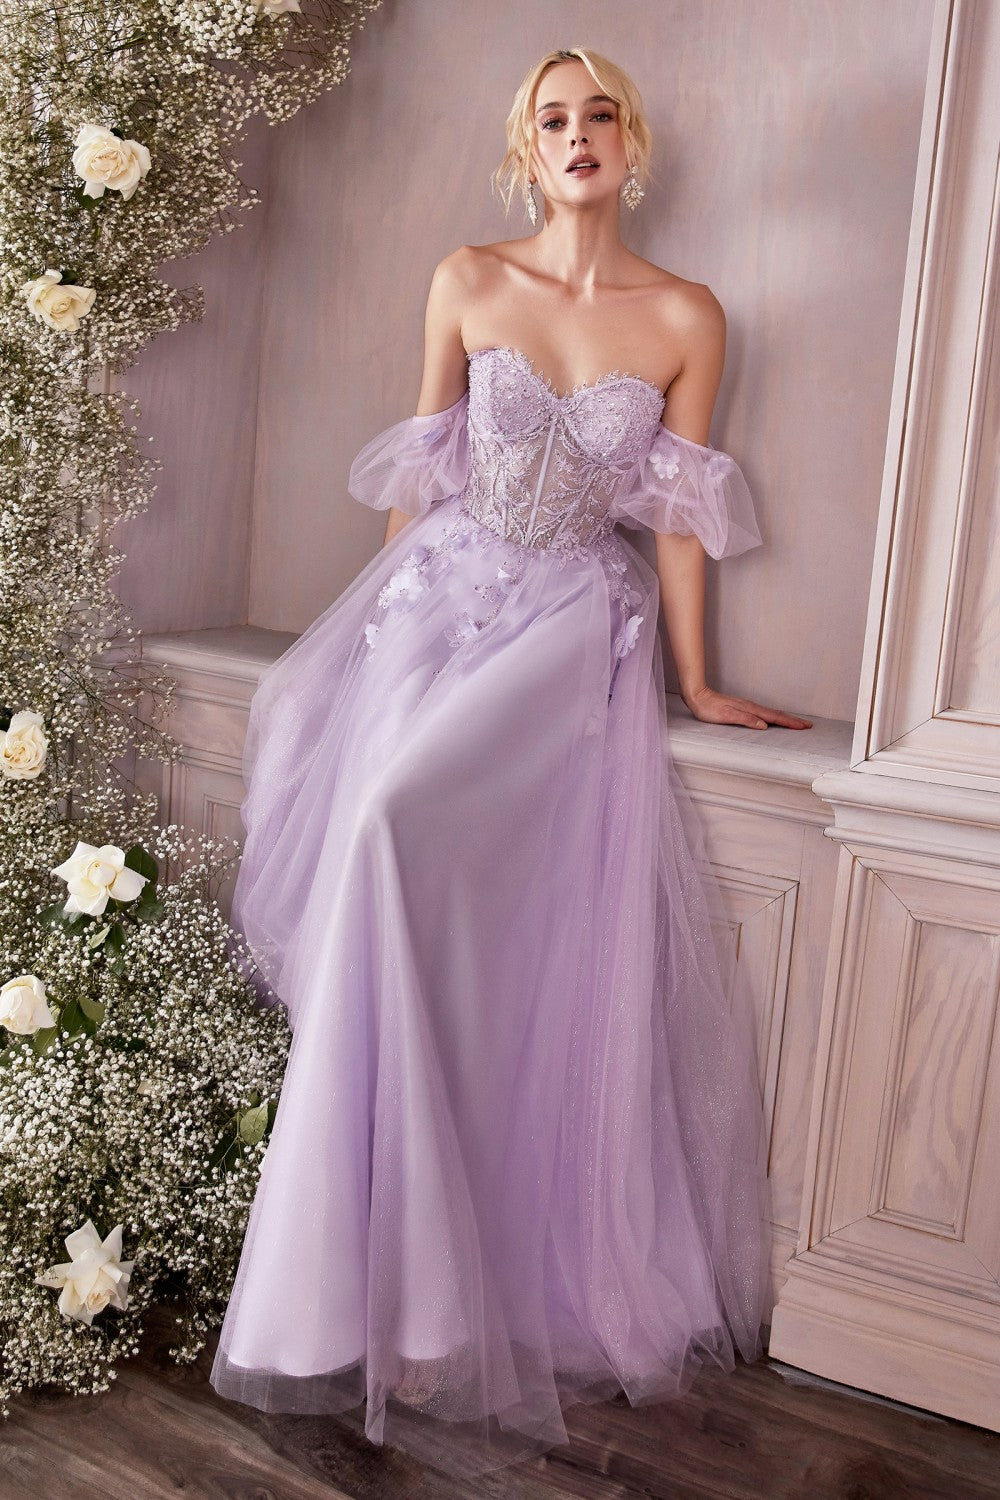 Strapless Layered Tulle Ball & Prom Gown Structured Embroidered Sequin Appliqué Corset Floral Vintage Dress A-line Skirt CDCD0191-3